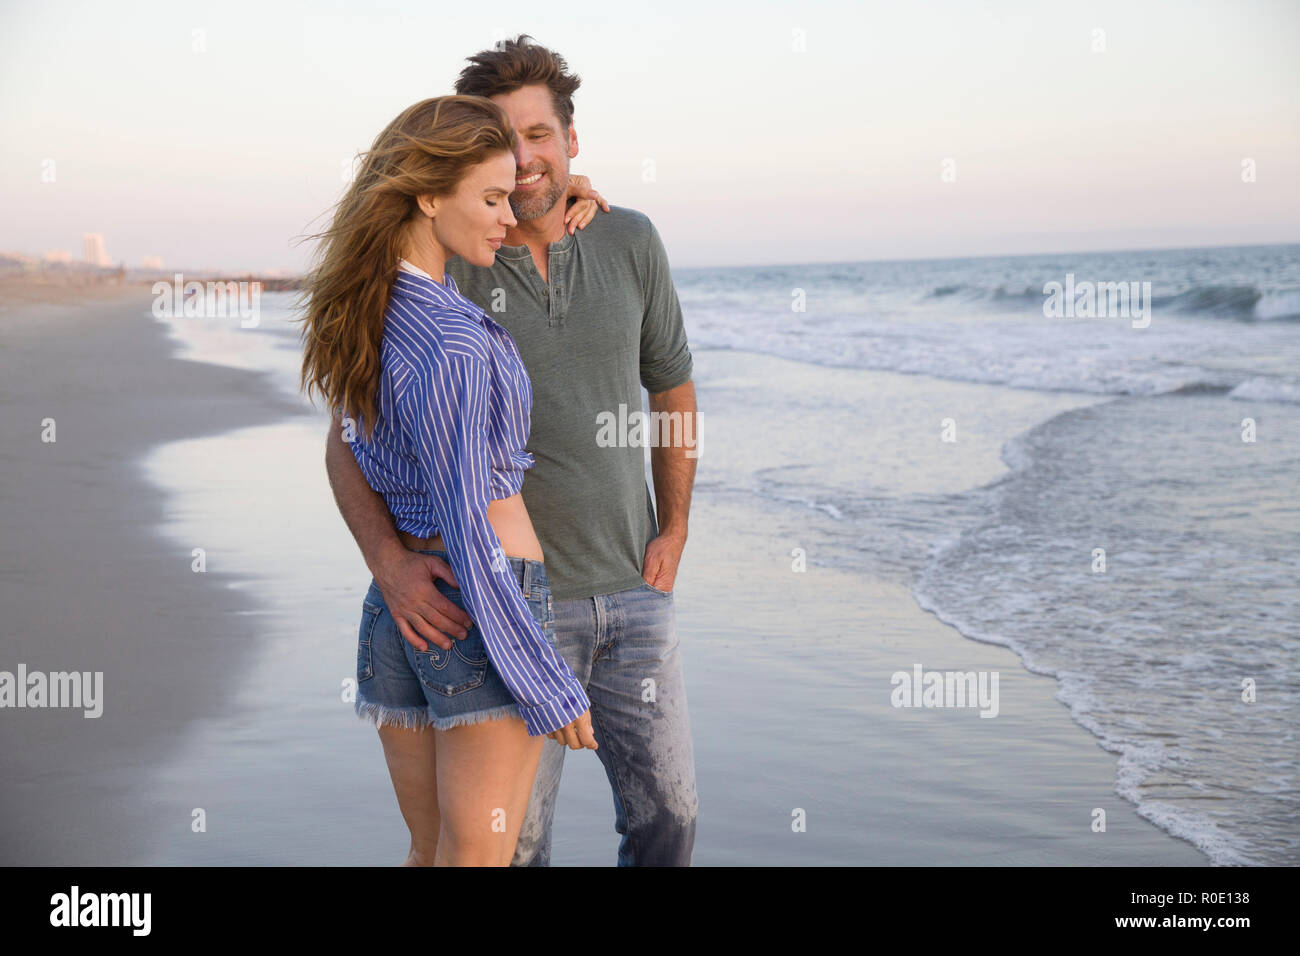 Three-Quarter Length Portrait of Mid-Adult Couple Standing at Beach Stock Photo